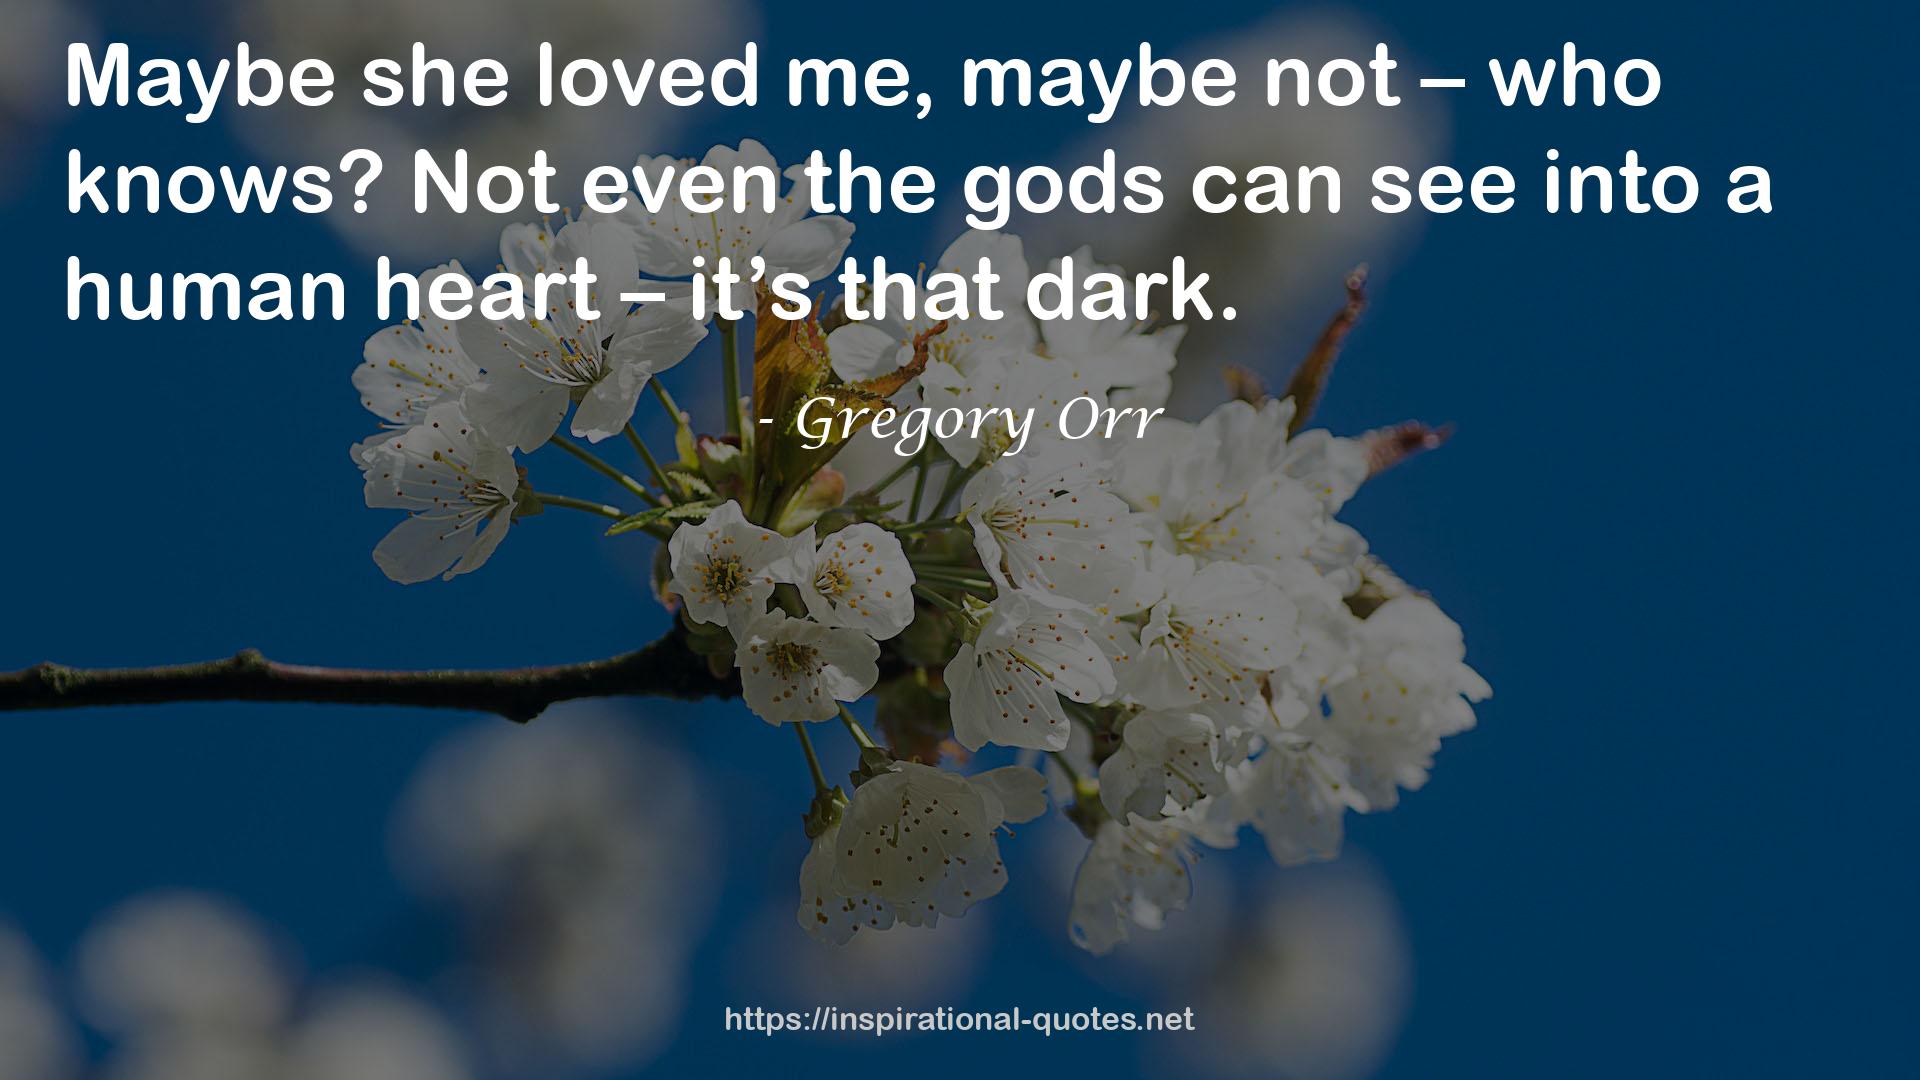 Gregory Orr QUOTES